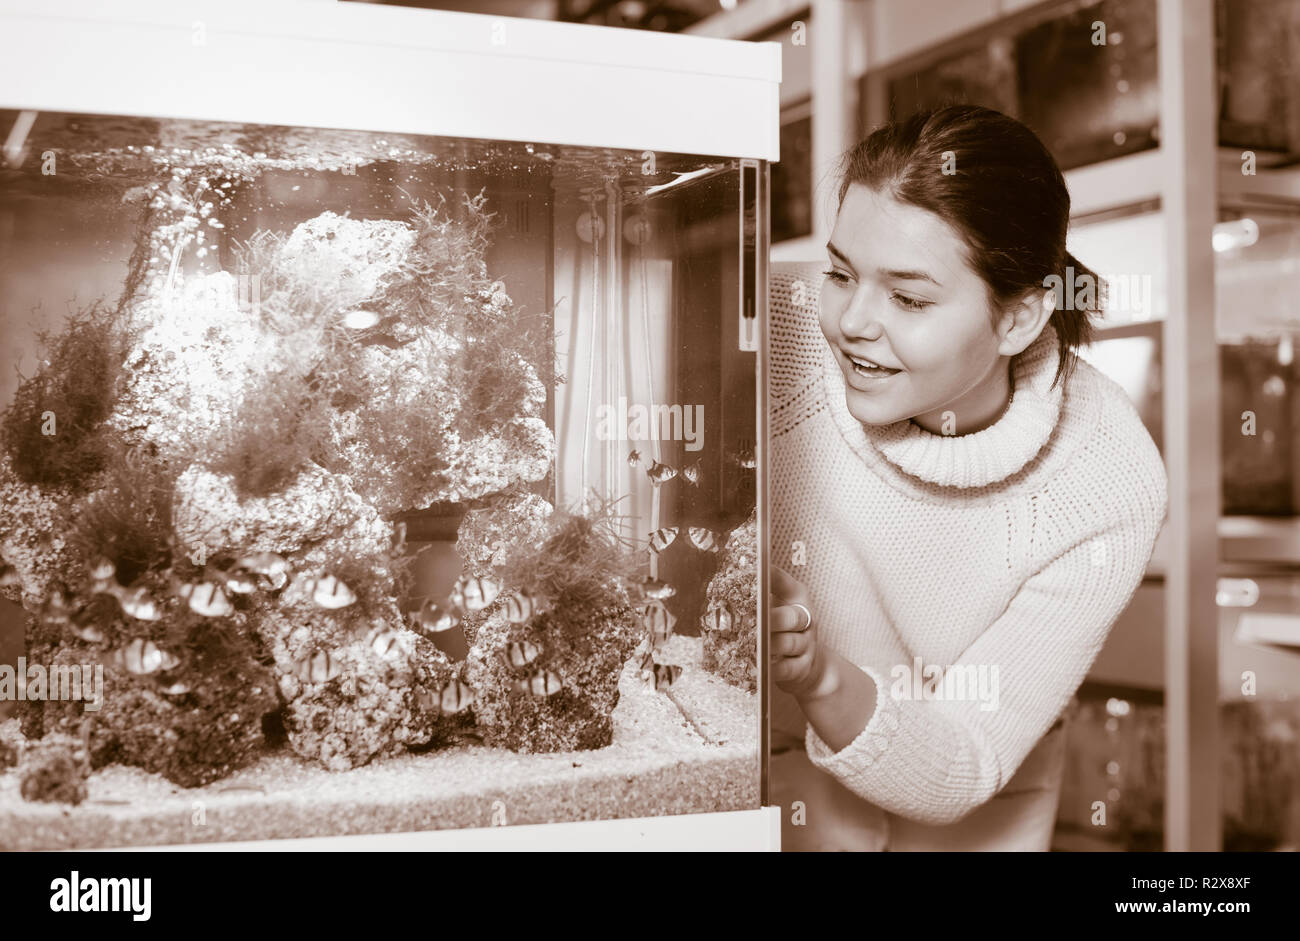 Happy positive girl looking at striped tropical fish in aquarium with rocks and seaweed inside in aquarium shop Stock Photo